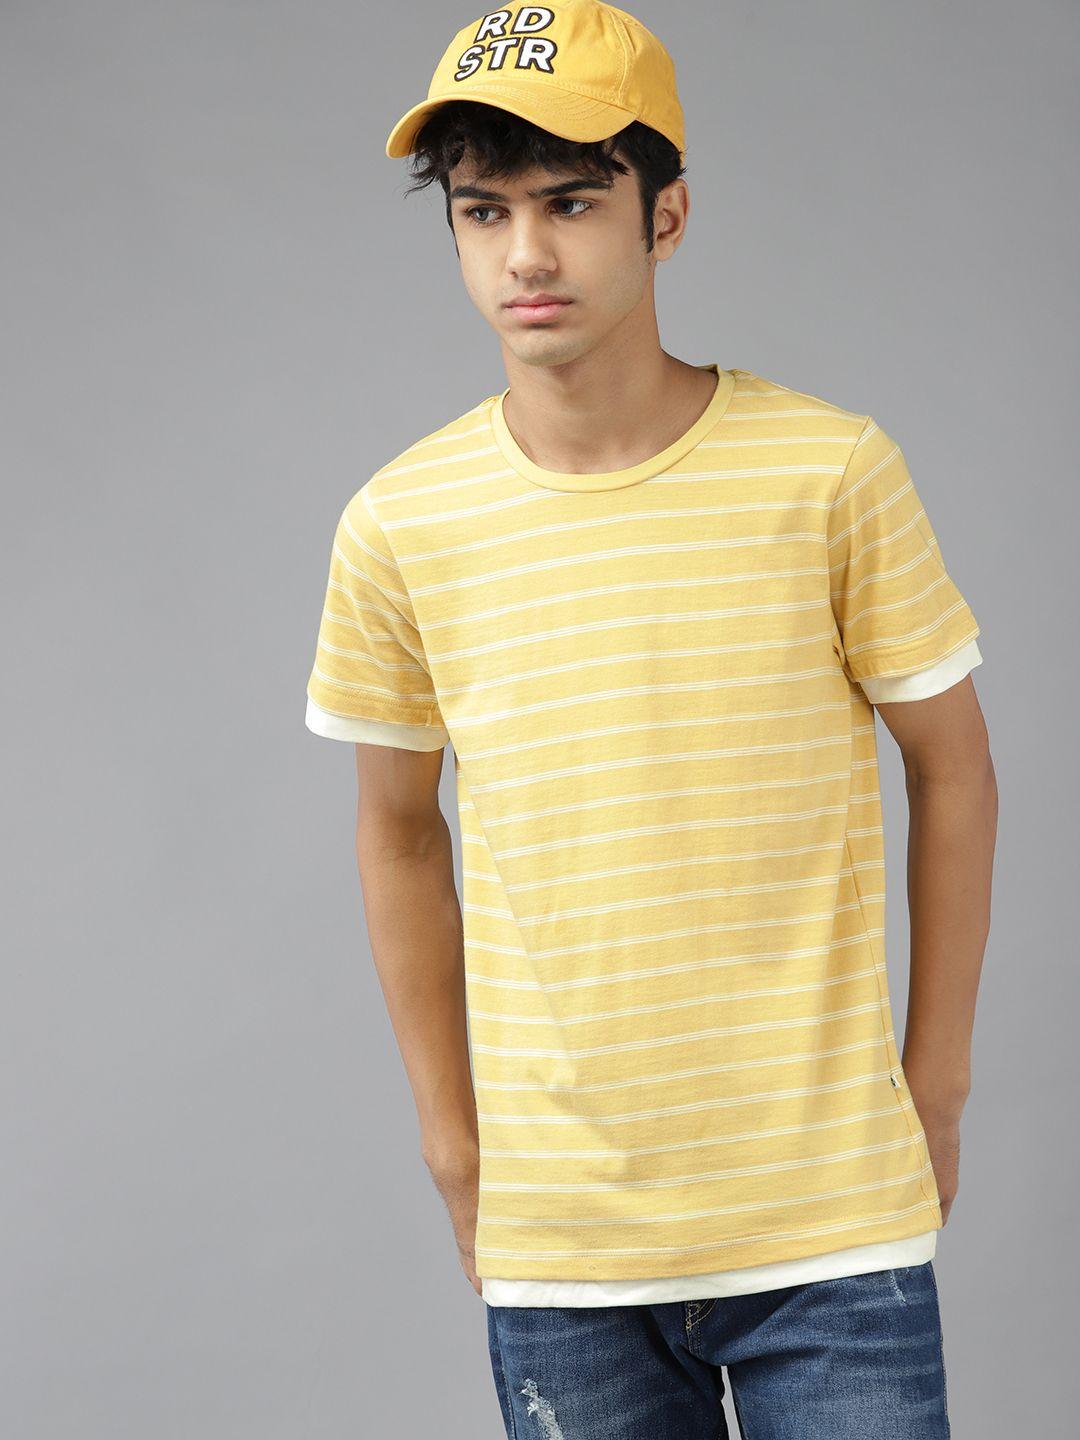 uth by roadster boys yellow & white striped pure cotton t-shirt